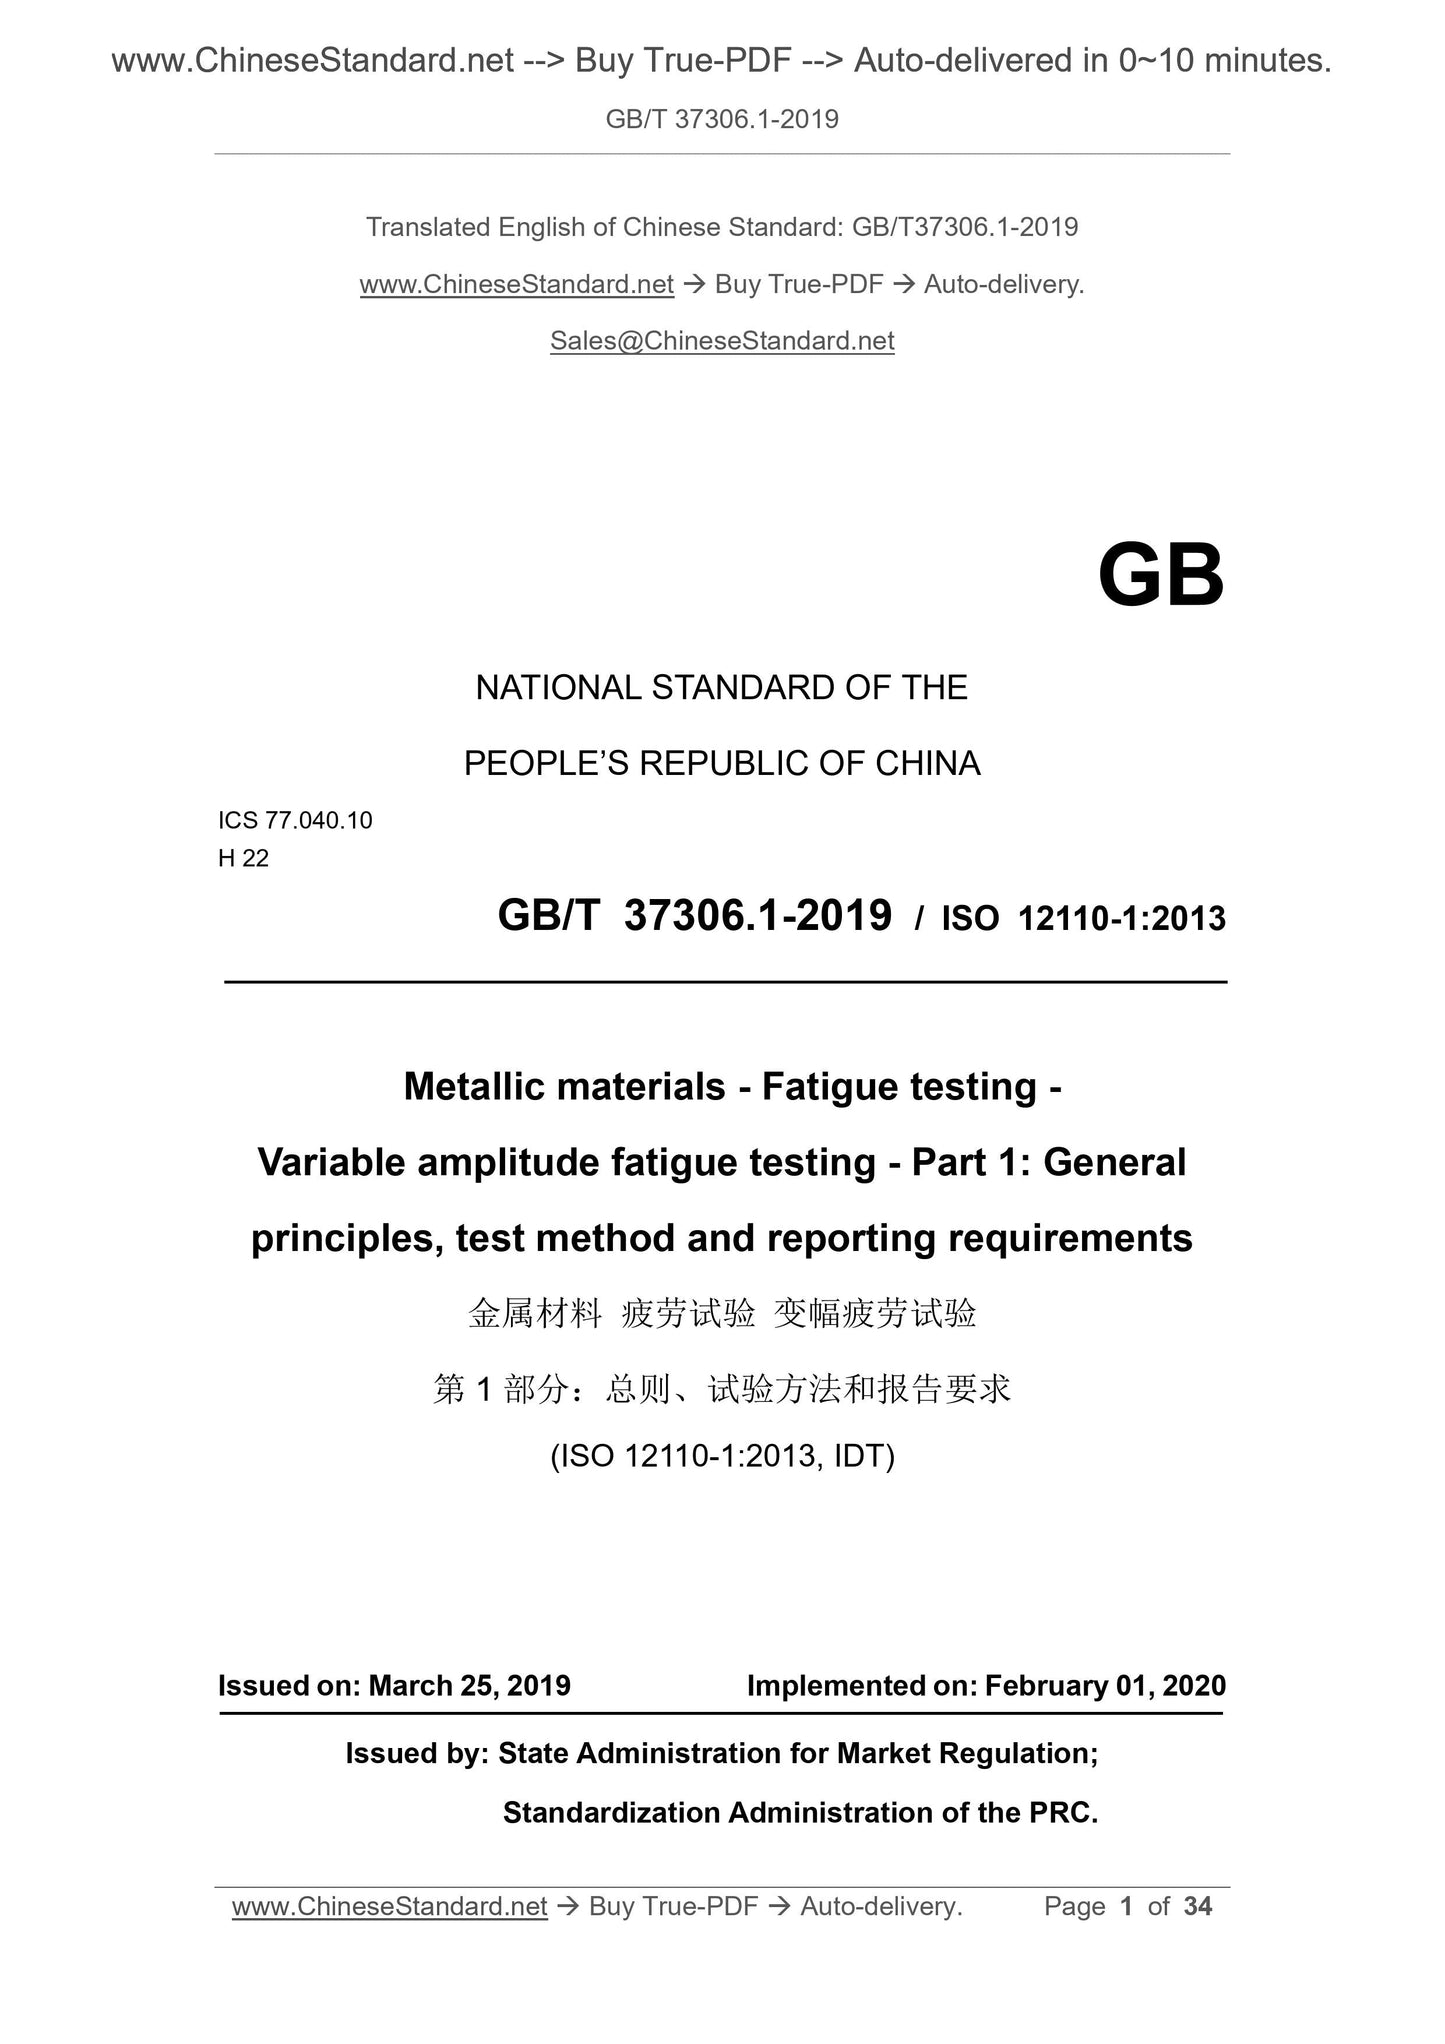 GB/T 37306.1-2019 Page 1